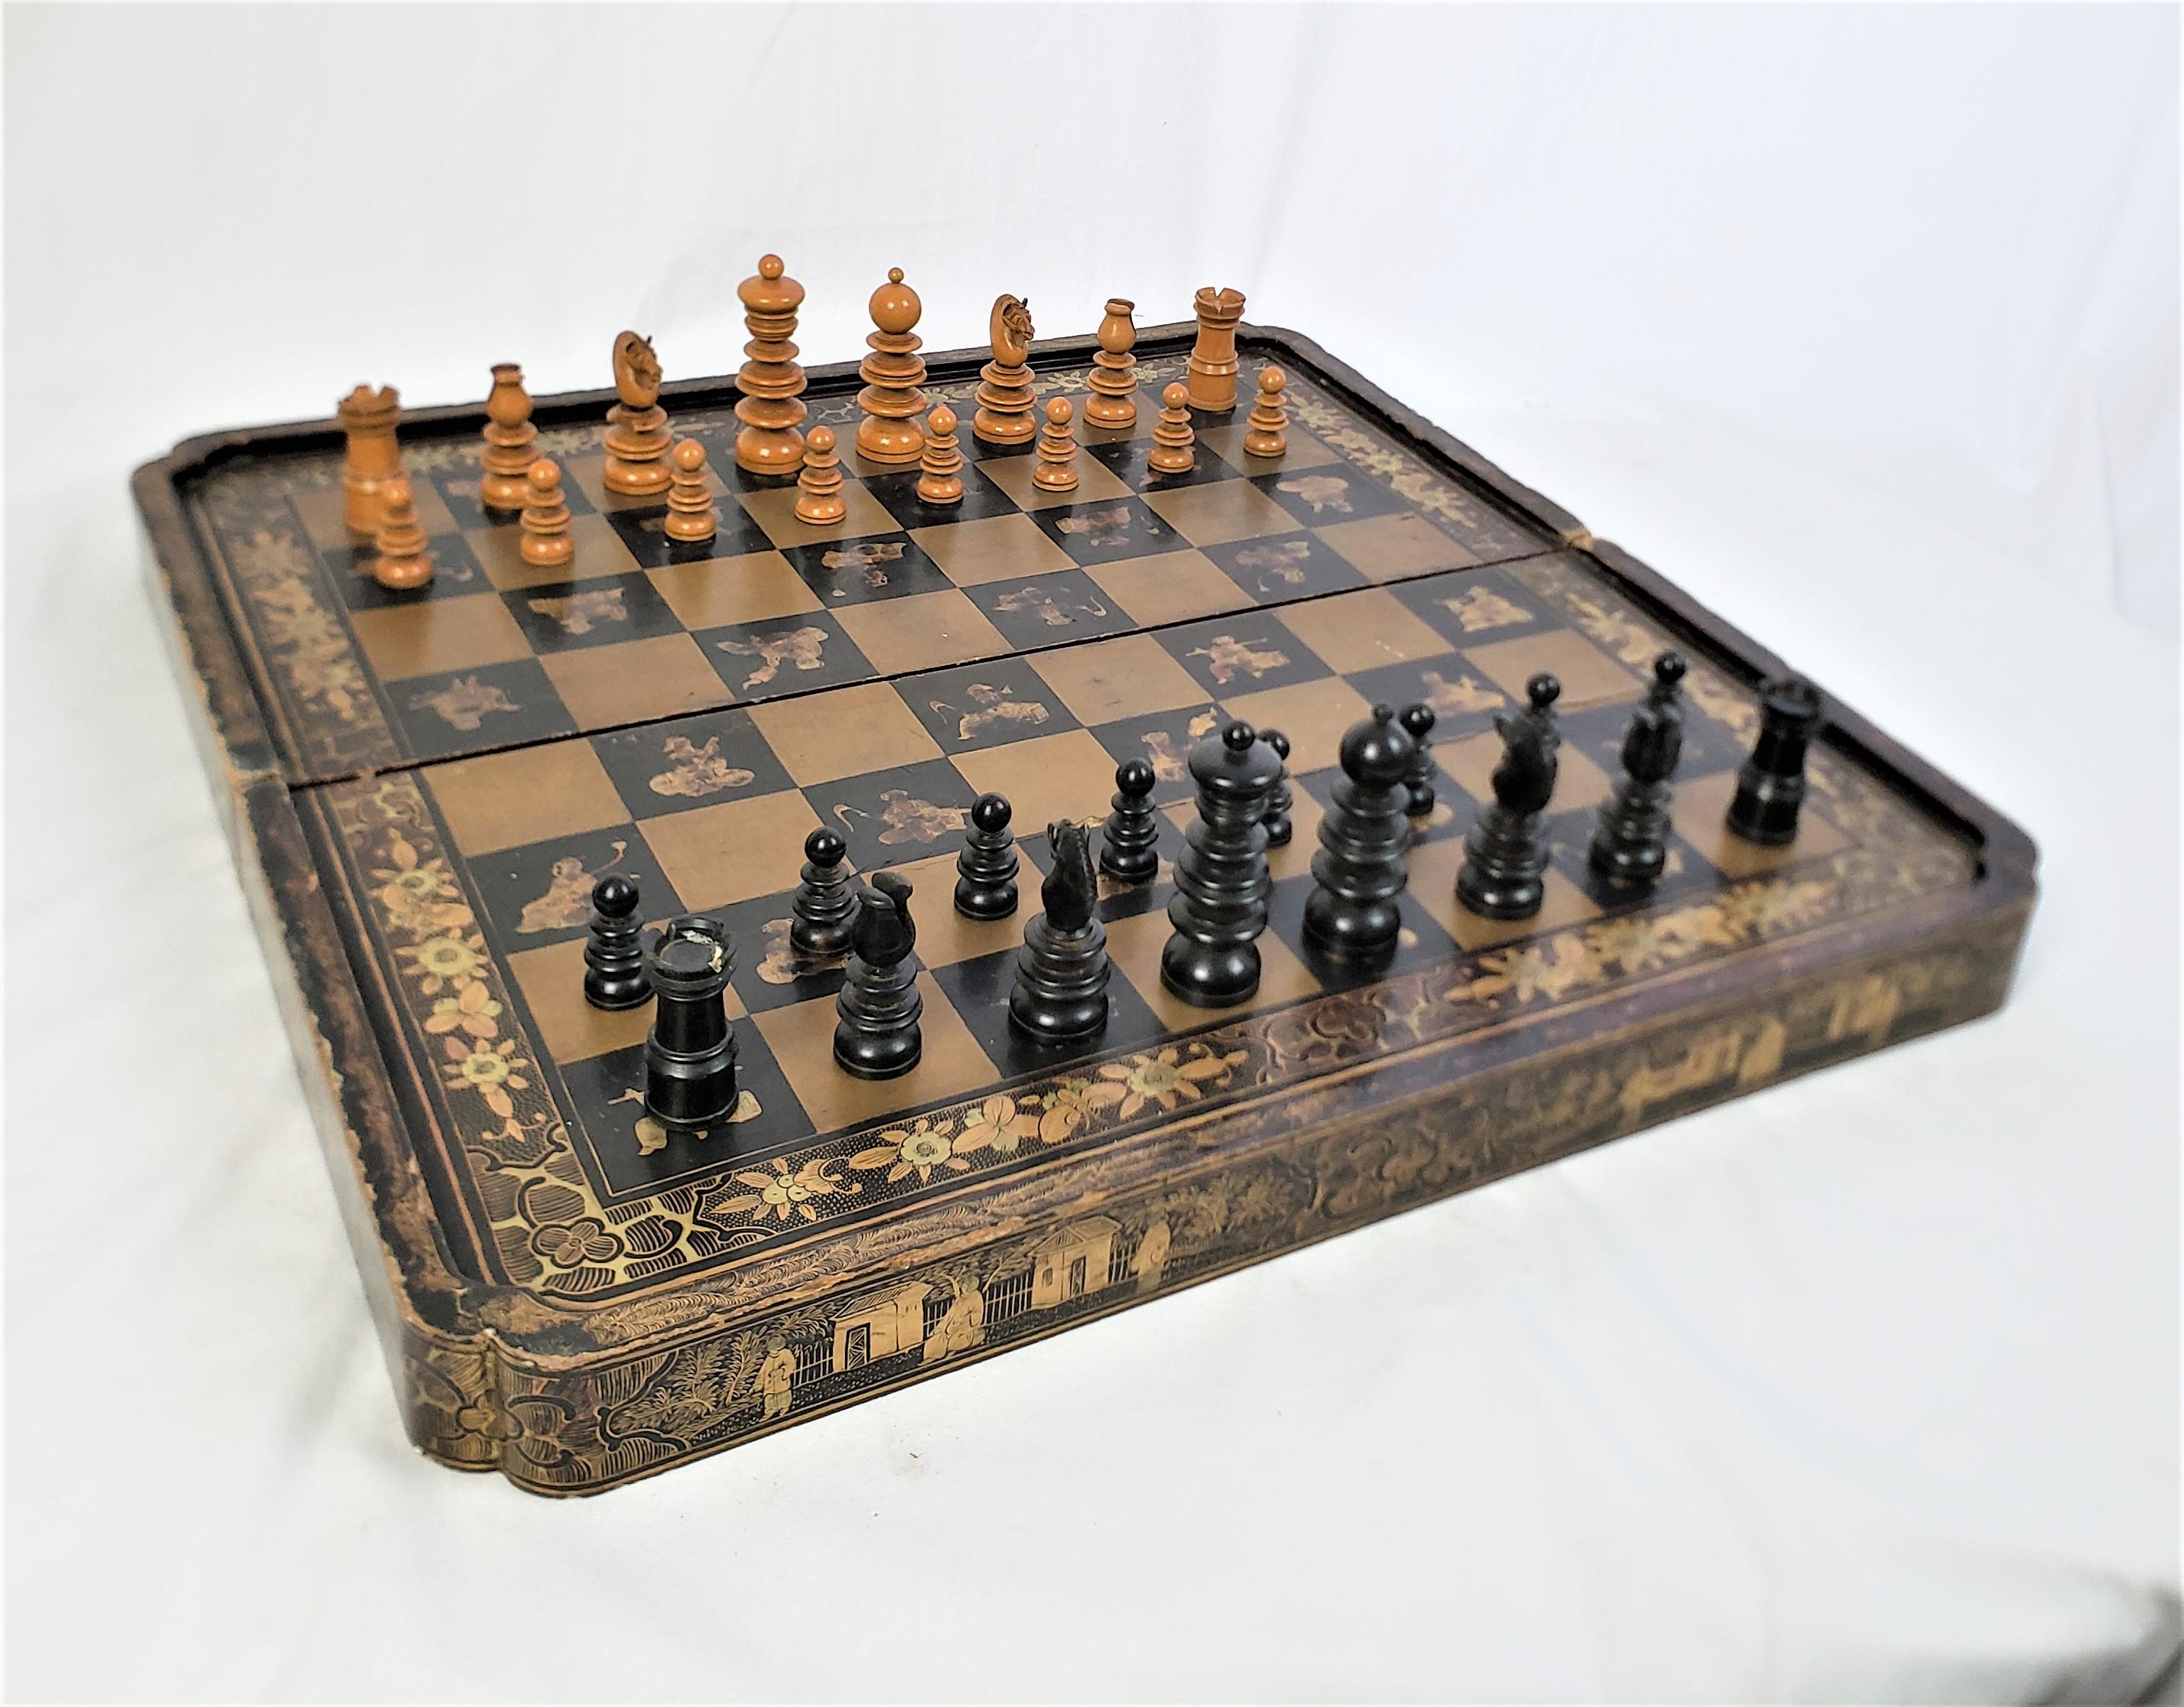 This antique games board and chess pieces are unsigned, but the board is presumed to have originated from China, dating to approximately 1850 and done in a Chinoiserie style and the pieces we believe originate from England. The board is composed of